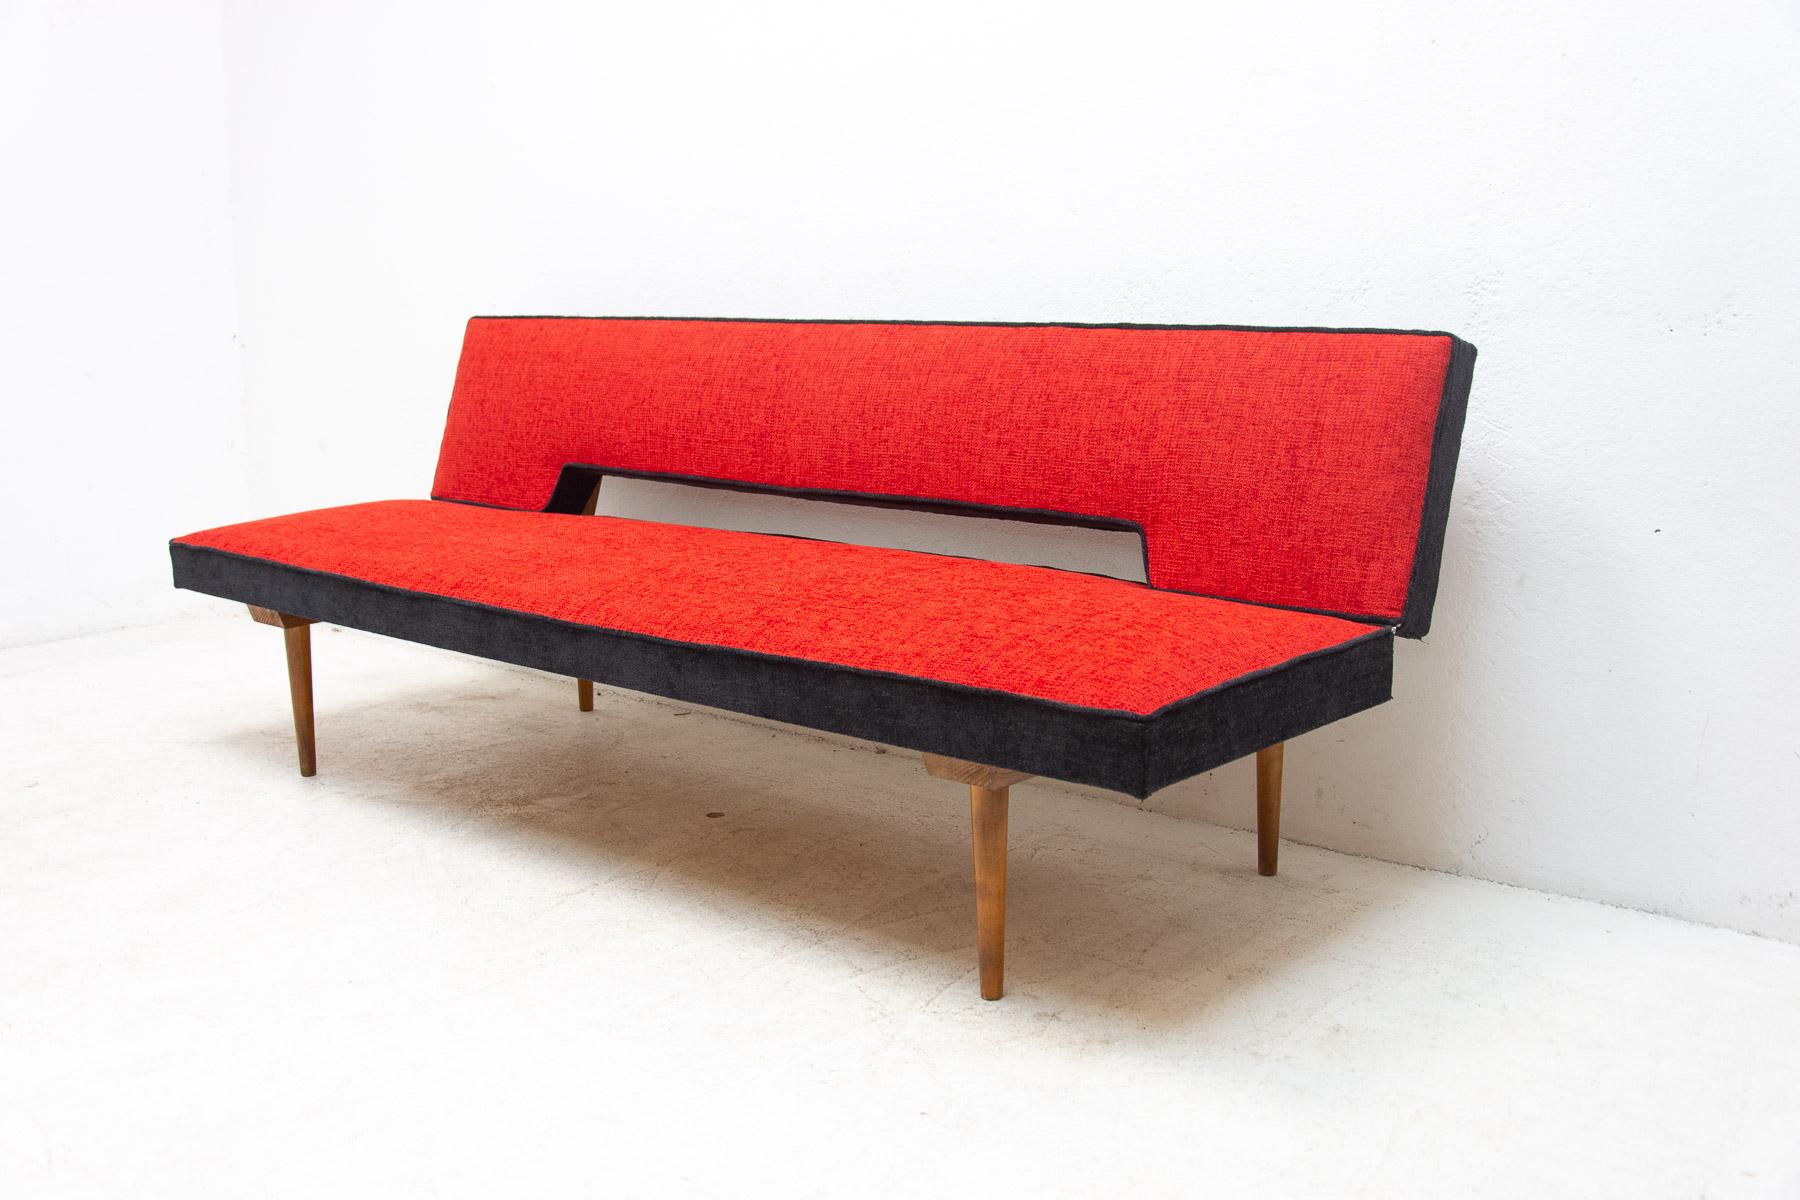 Mid-century sofa/daybed, made in the former Czechoslovakia in the 1960´s, designed by Miroslav Navrátil. Material: beech wood, fabric. The sofa is in excellent condition, fully renovated-new upholstery.

Height: 71 cm

Lenght: 196 cm

Depth: